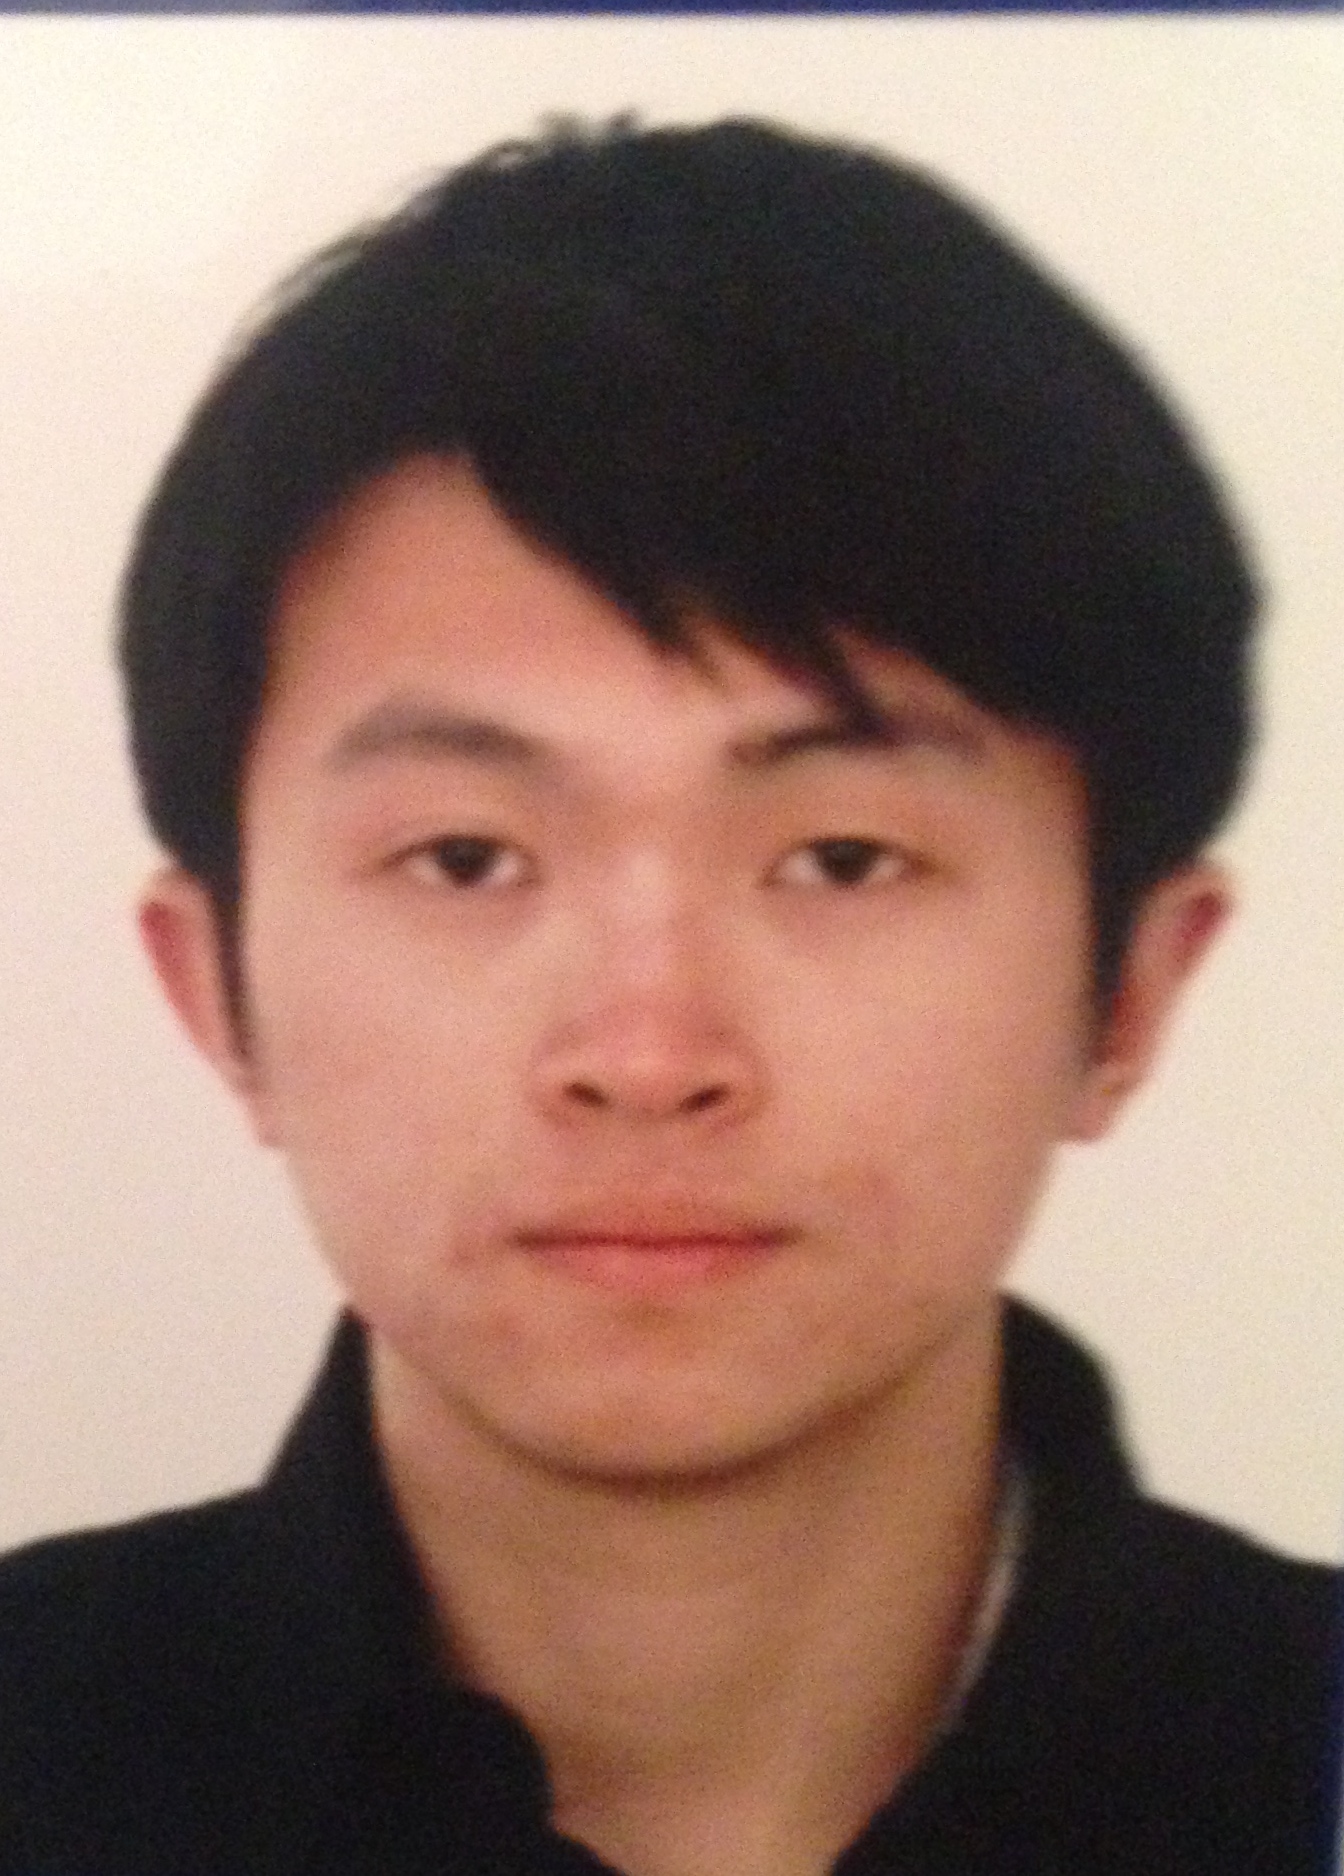 New member: Qicheng Shang joins the group!